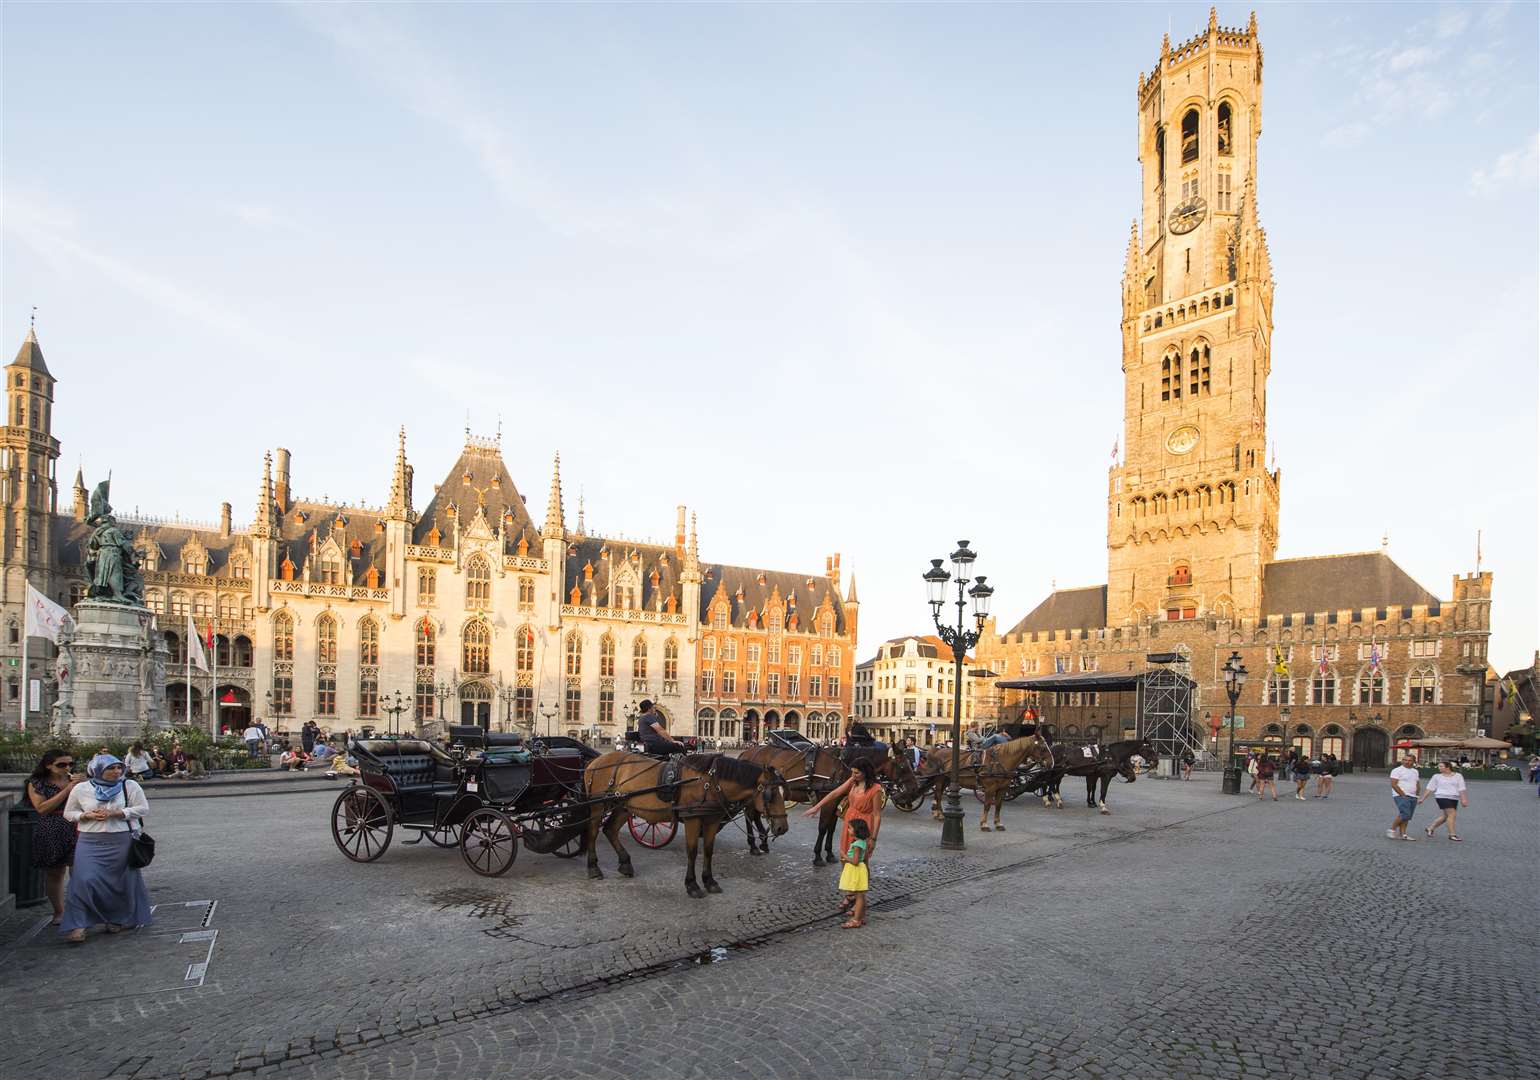 The Markt square features a 13th-century 47 bell carrillon belfry and 83 meter tower